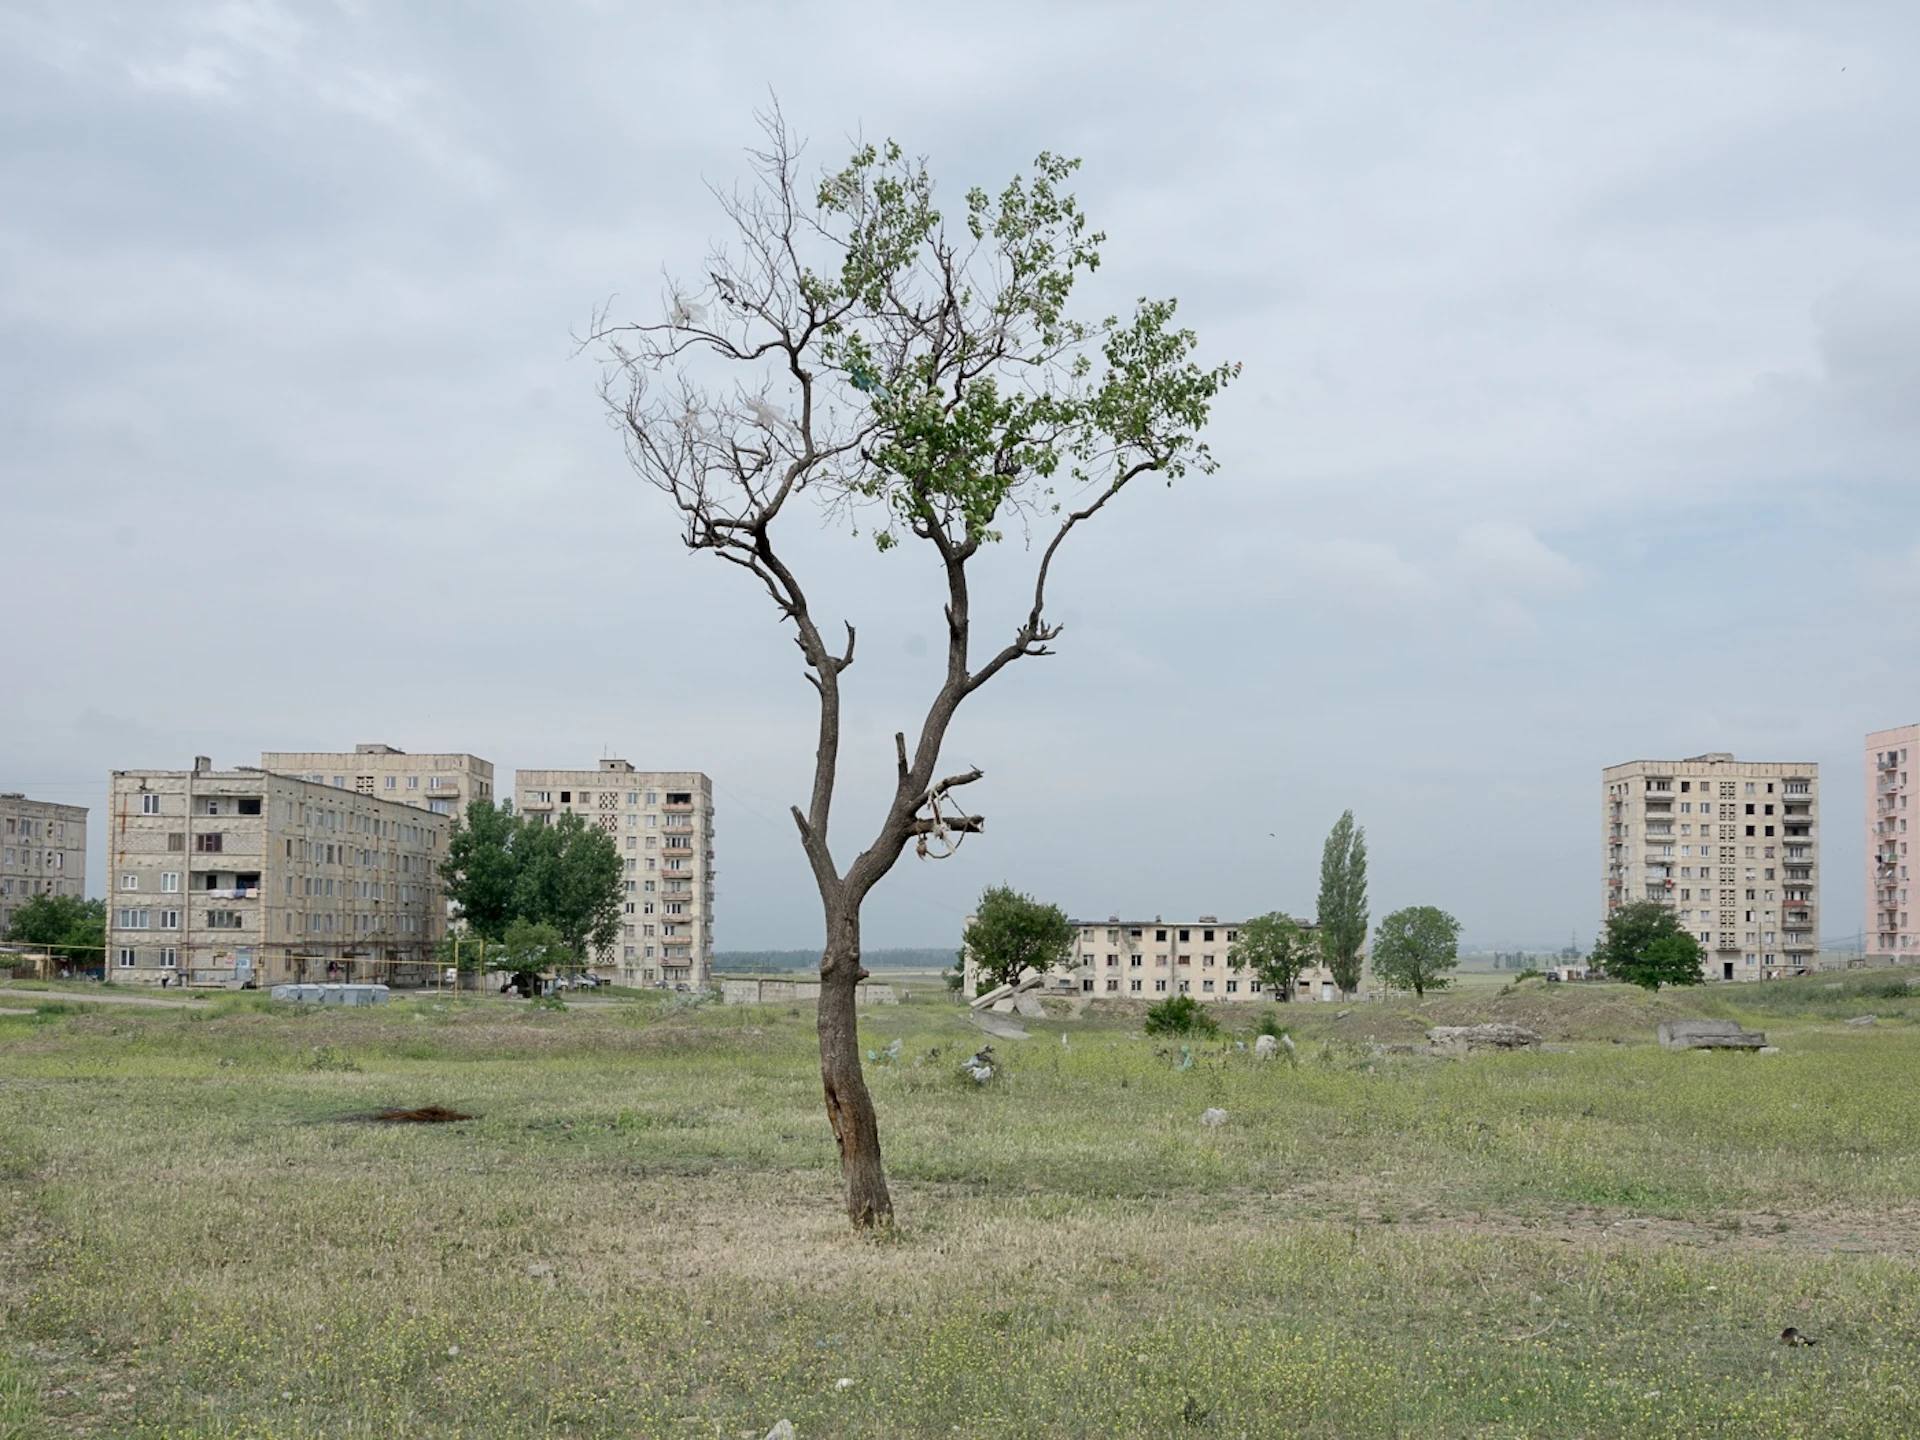 The forgotten housing estate that was once a Soviet utopia